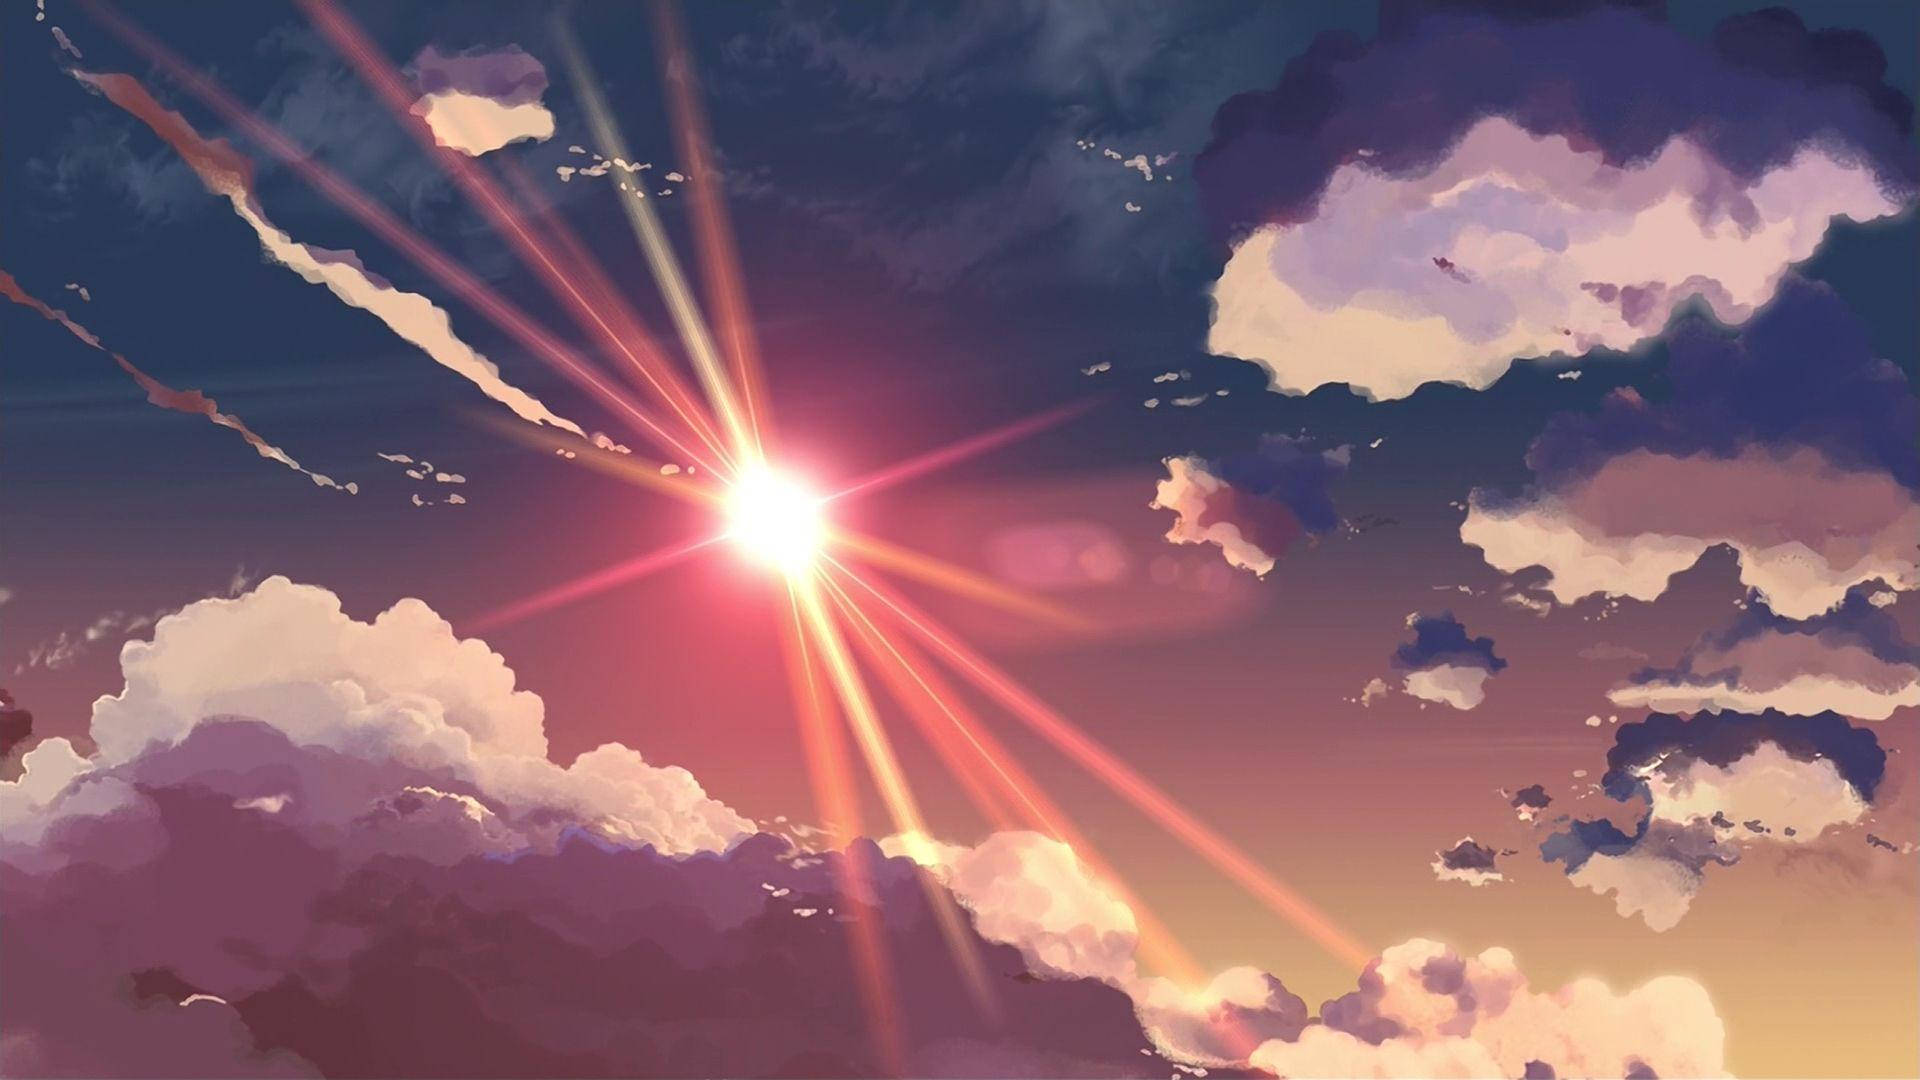 Download The Sun In The Sky Aesthetic Anime Scenery Wallpaper